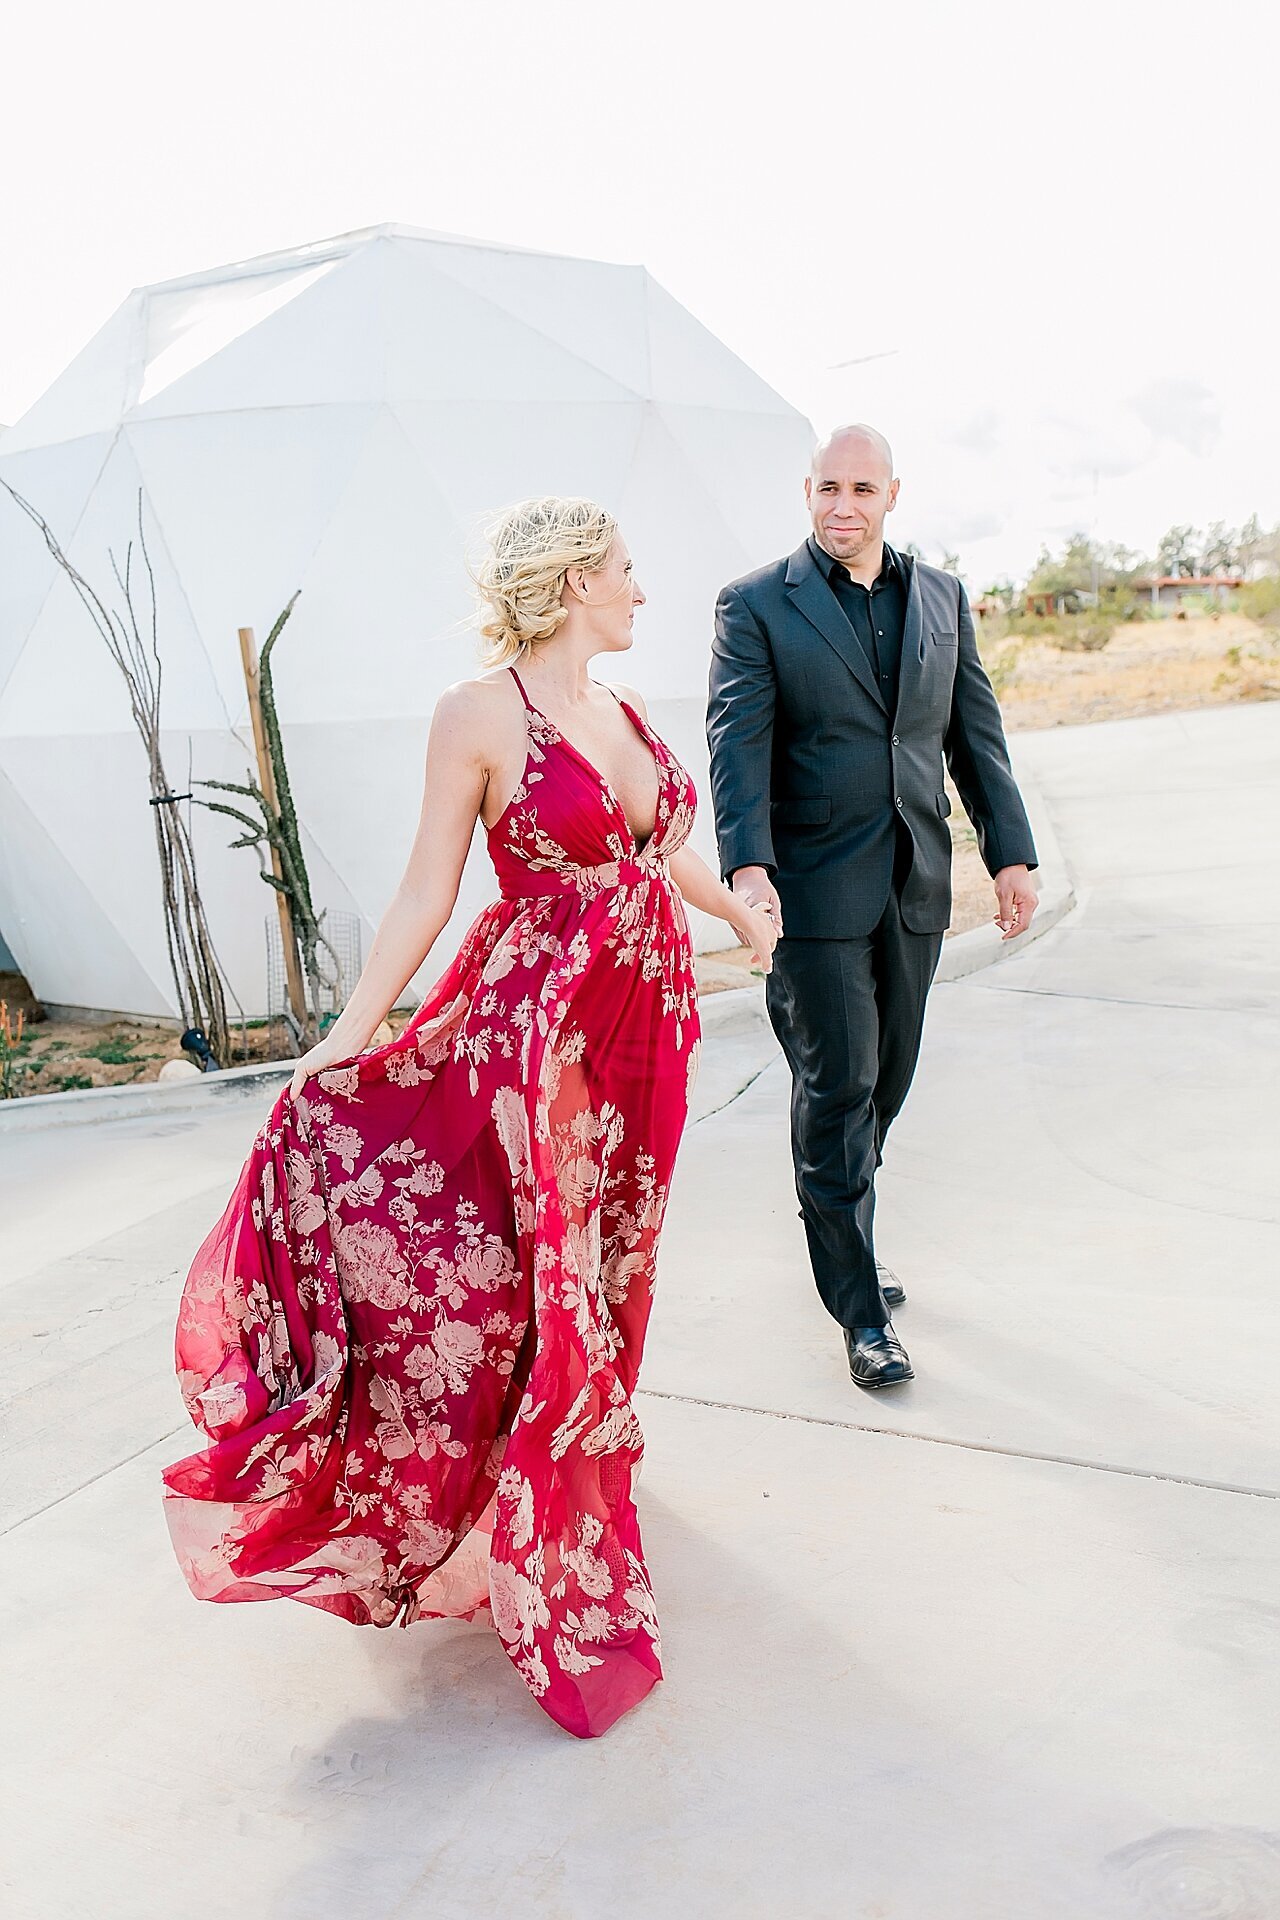 MIchelle Peterson Photography Redlands California wedding and portrait photographer_1100